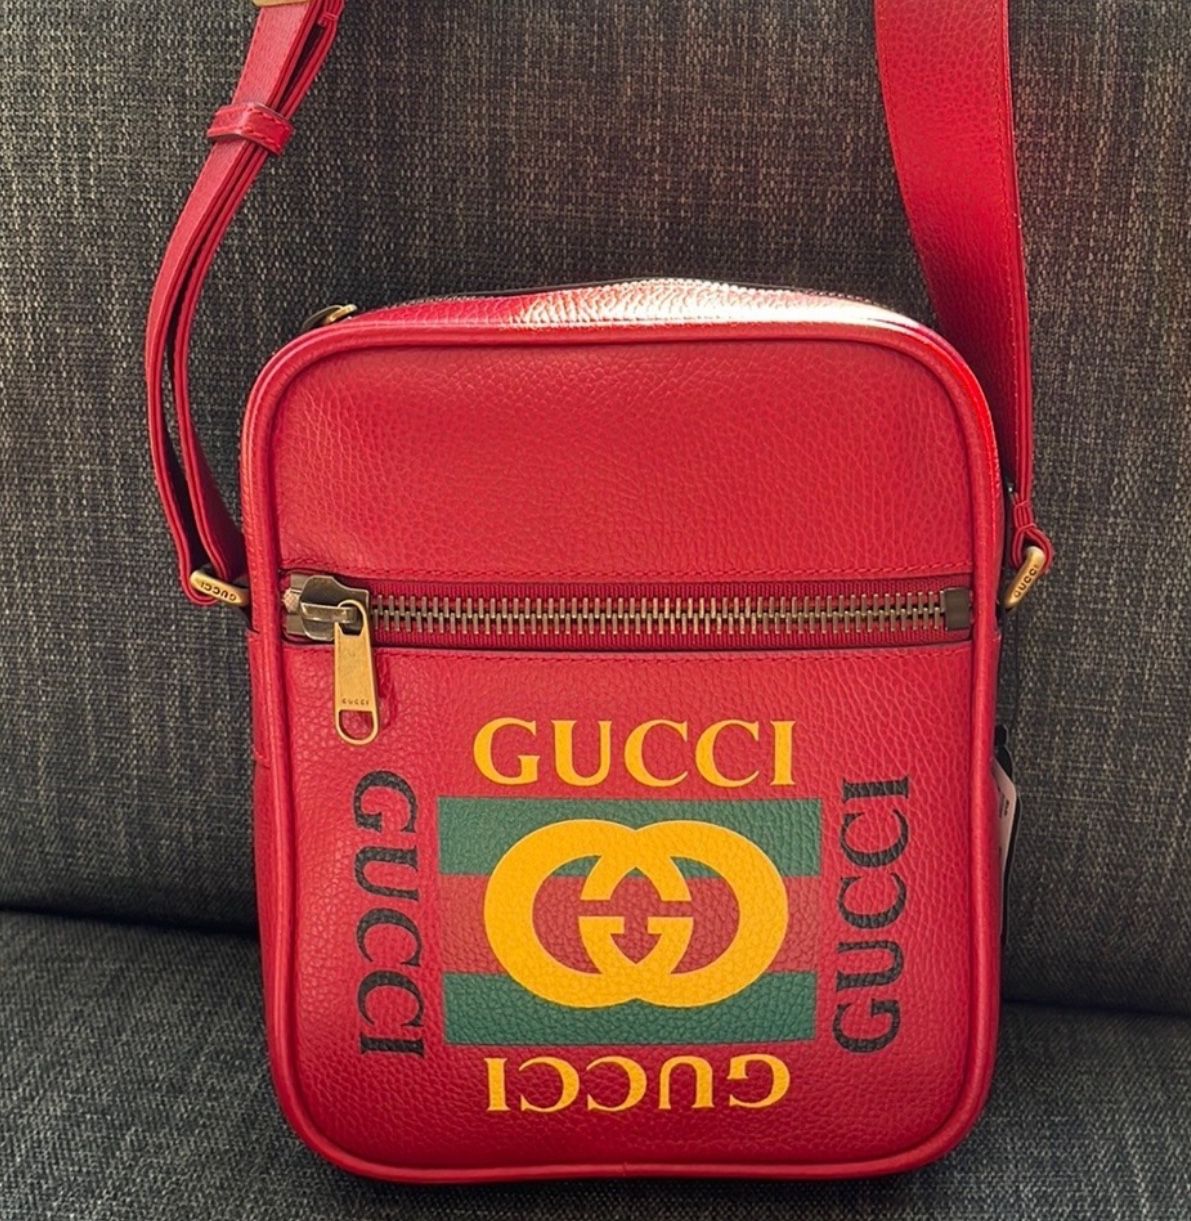 Gucci GG logo red leather messenger crossbody bag NWT